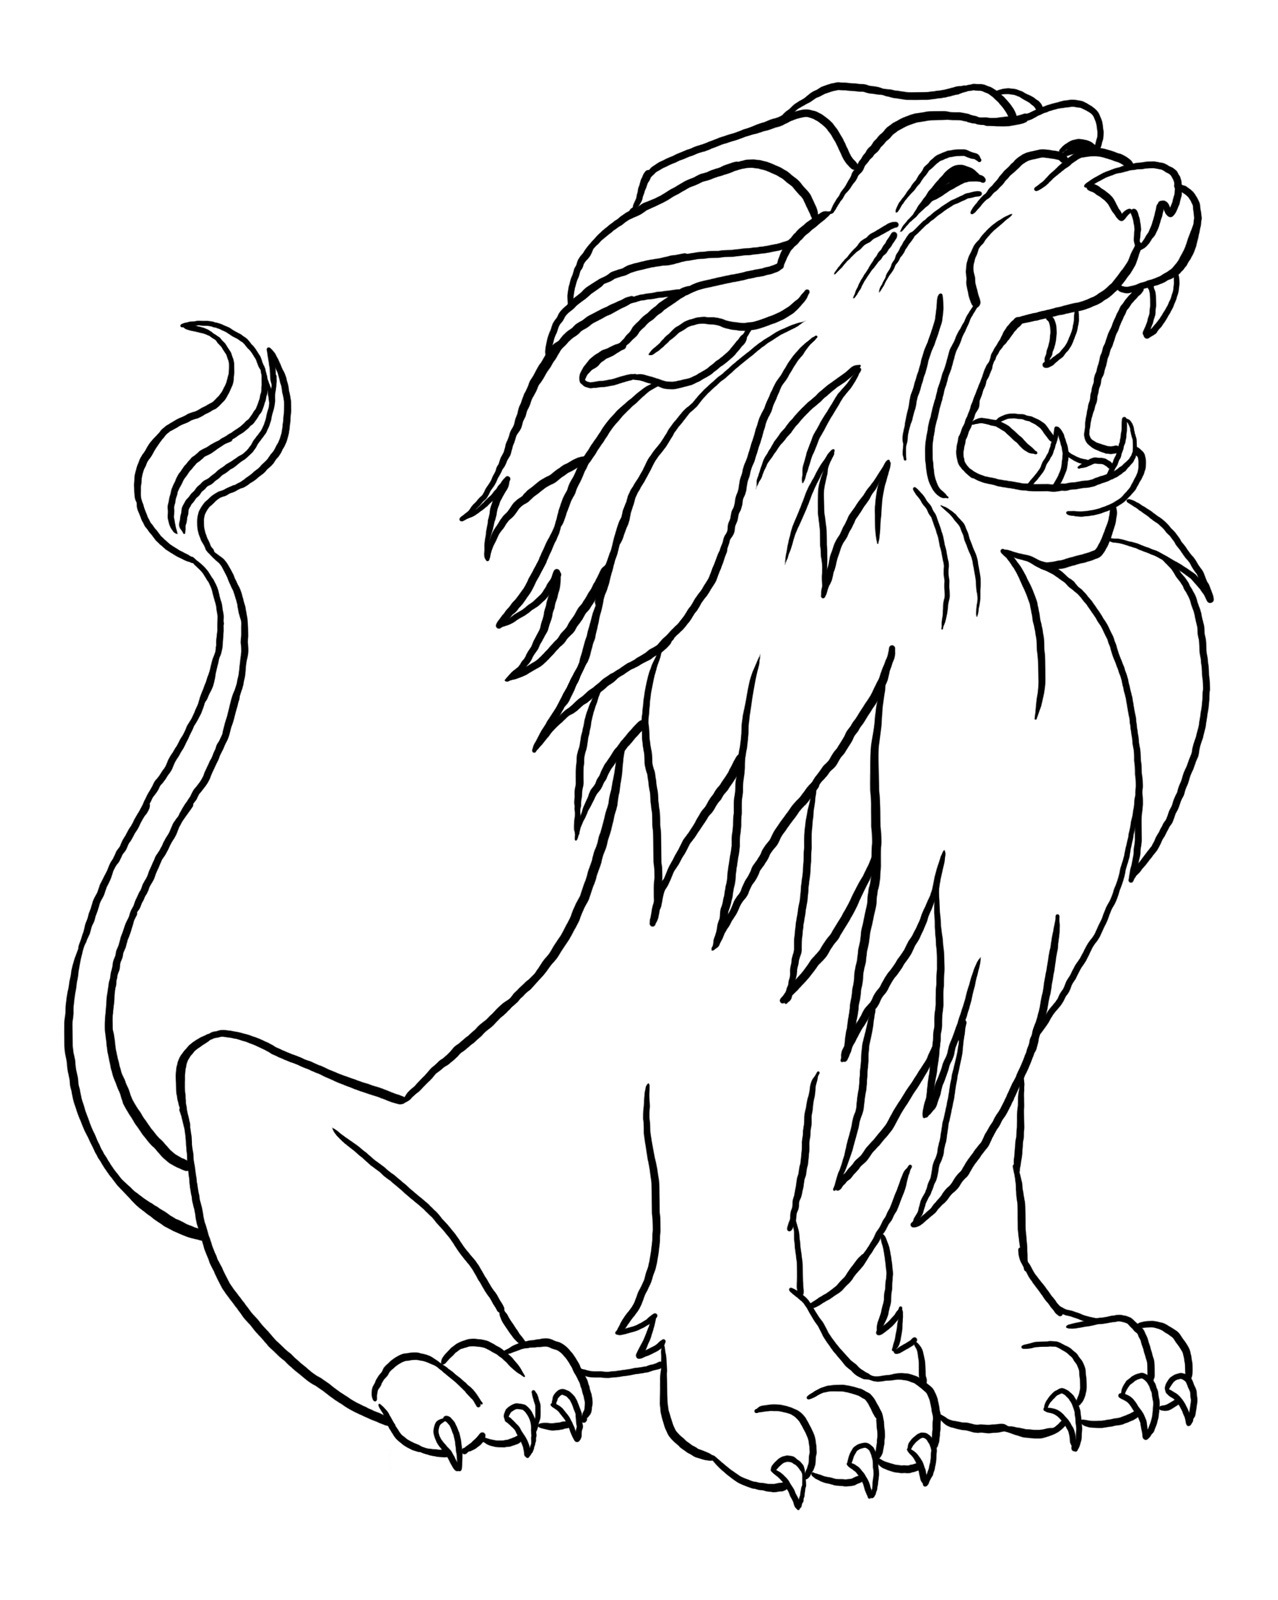 lion-face-outline-drawing-at-getdrawings-free-download